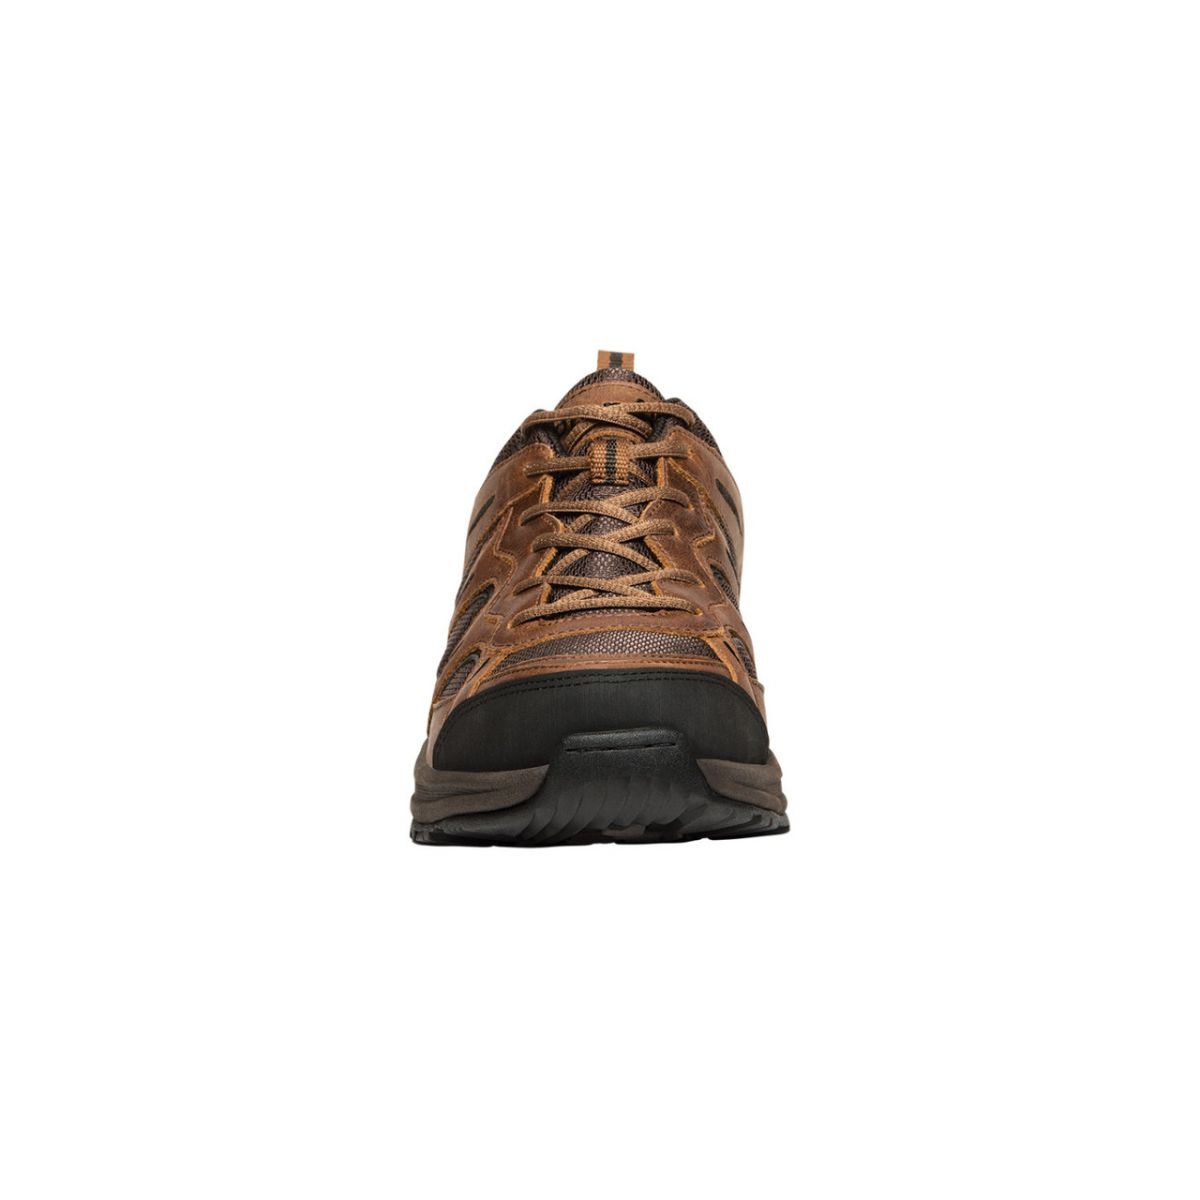 Propet Men's Connelly Hiking Shoe Brown - M5503BR BROWN - BROWN, 7.5-D